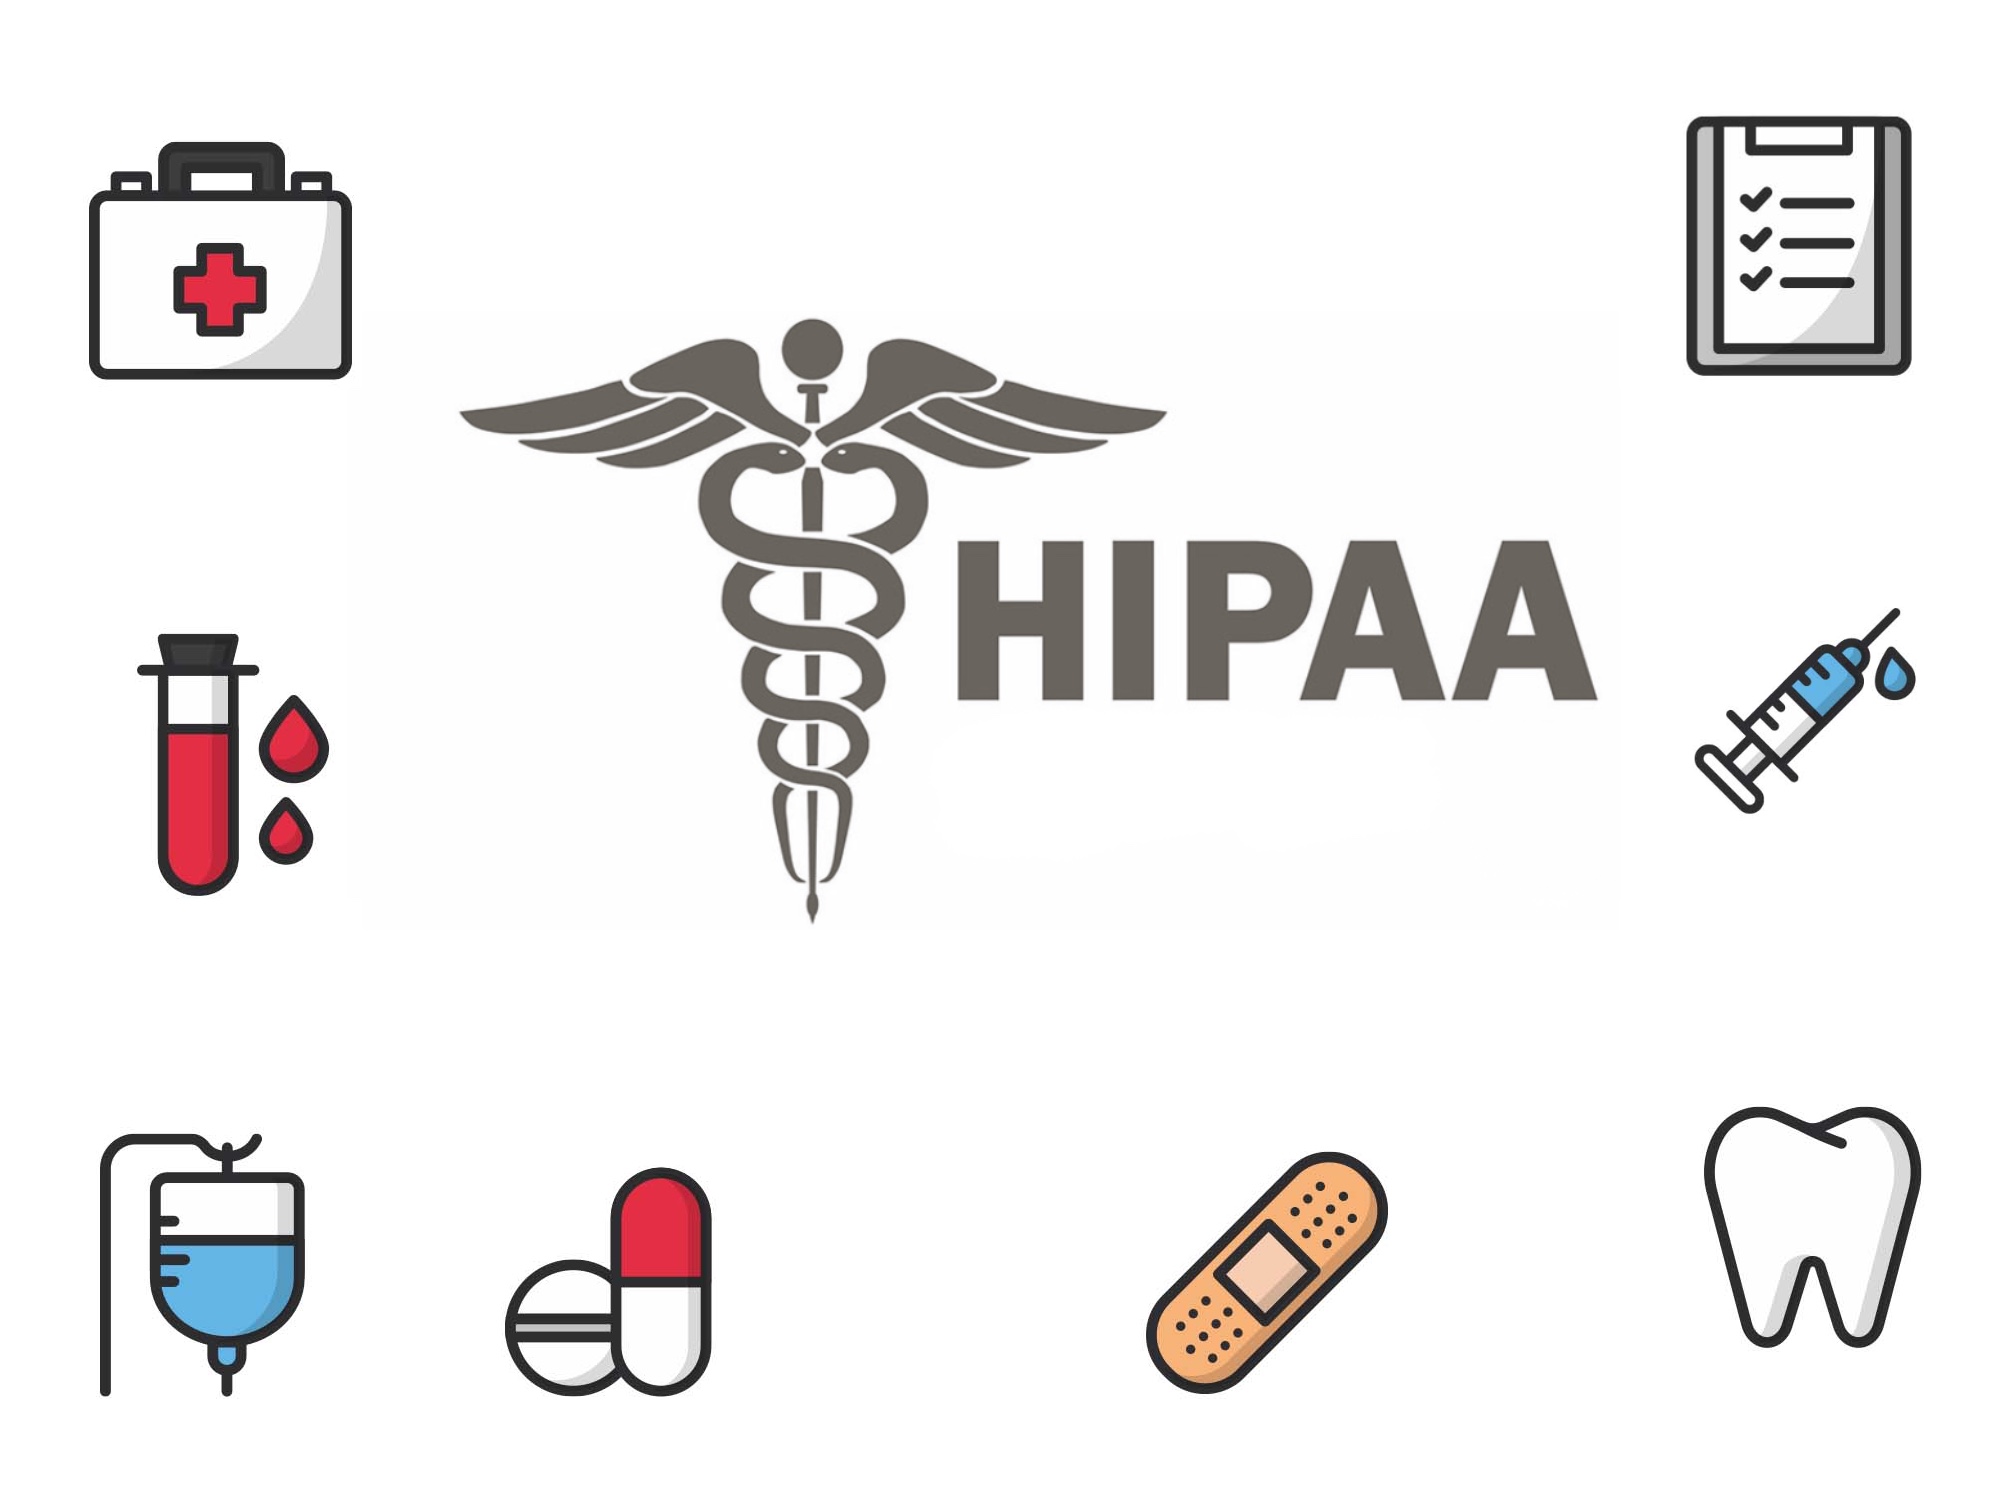 HIPAA Compliant IT Services